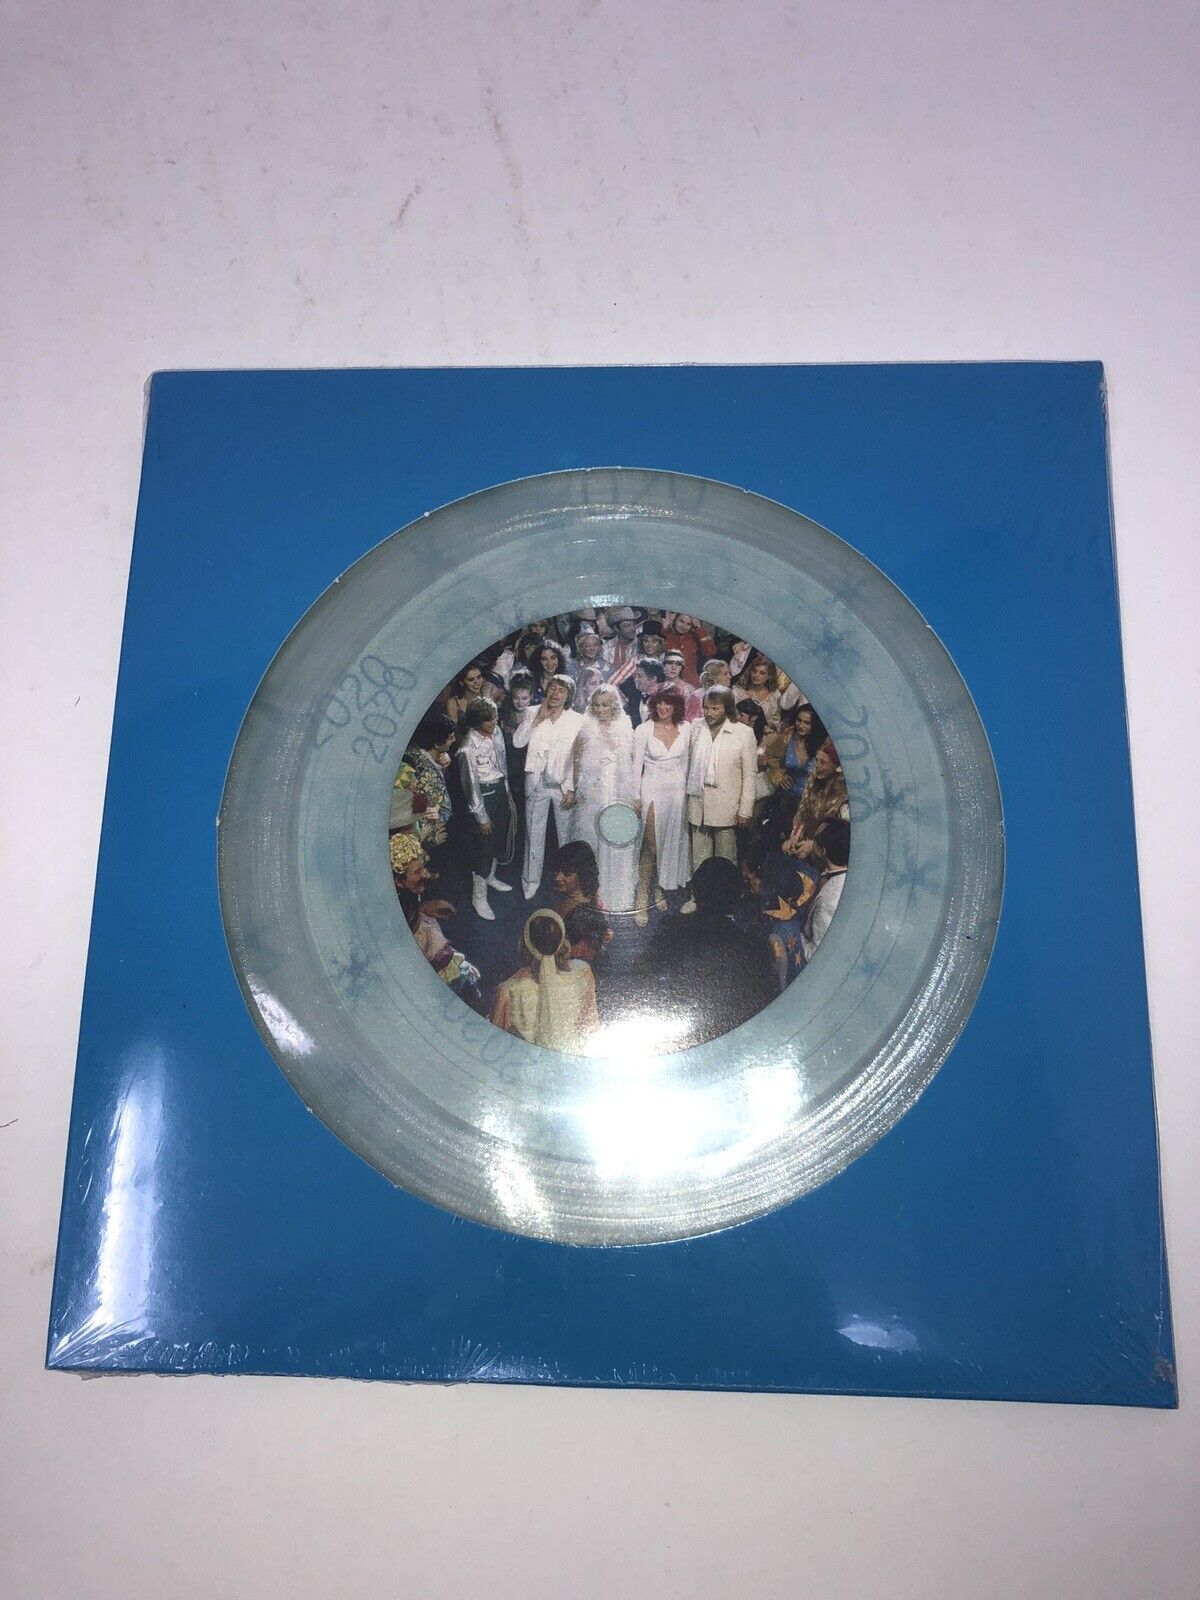 ABBA Happy New Year 7” Clear Picture Disc Vinyl LP  # /4000 Only 4K Ever Made